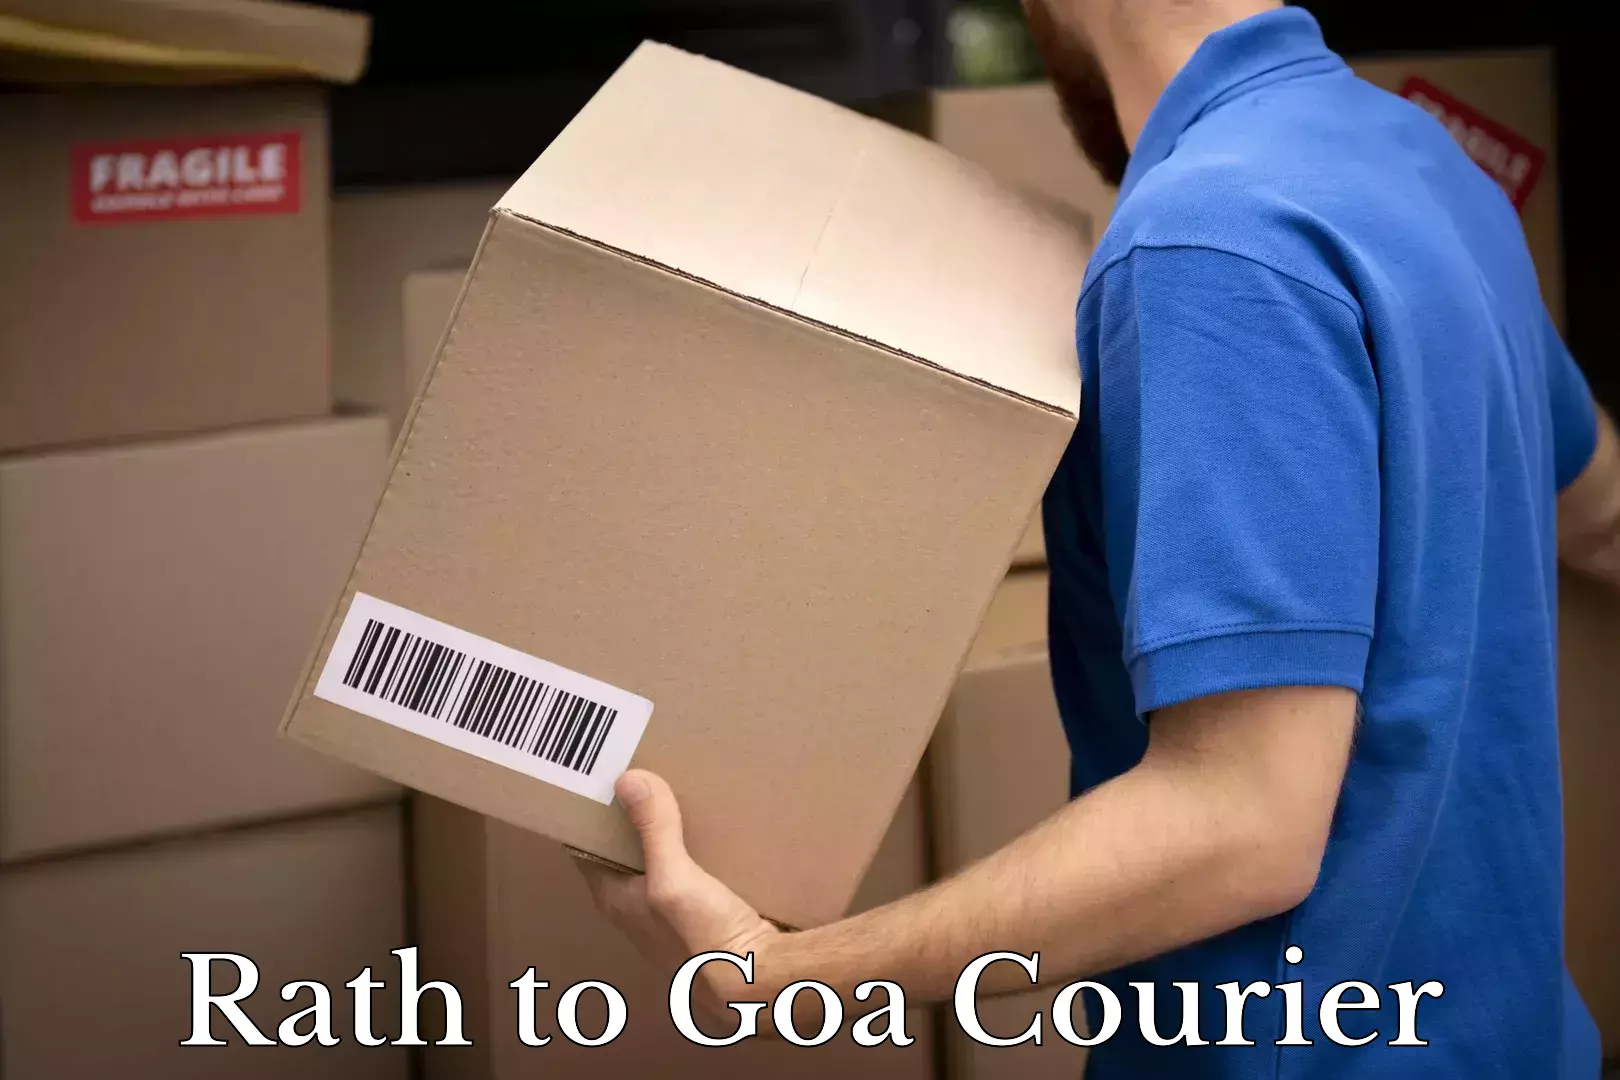 Cargo delivery service Rath to Goa